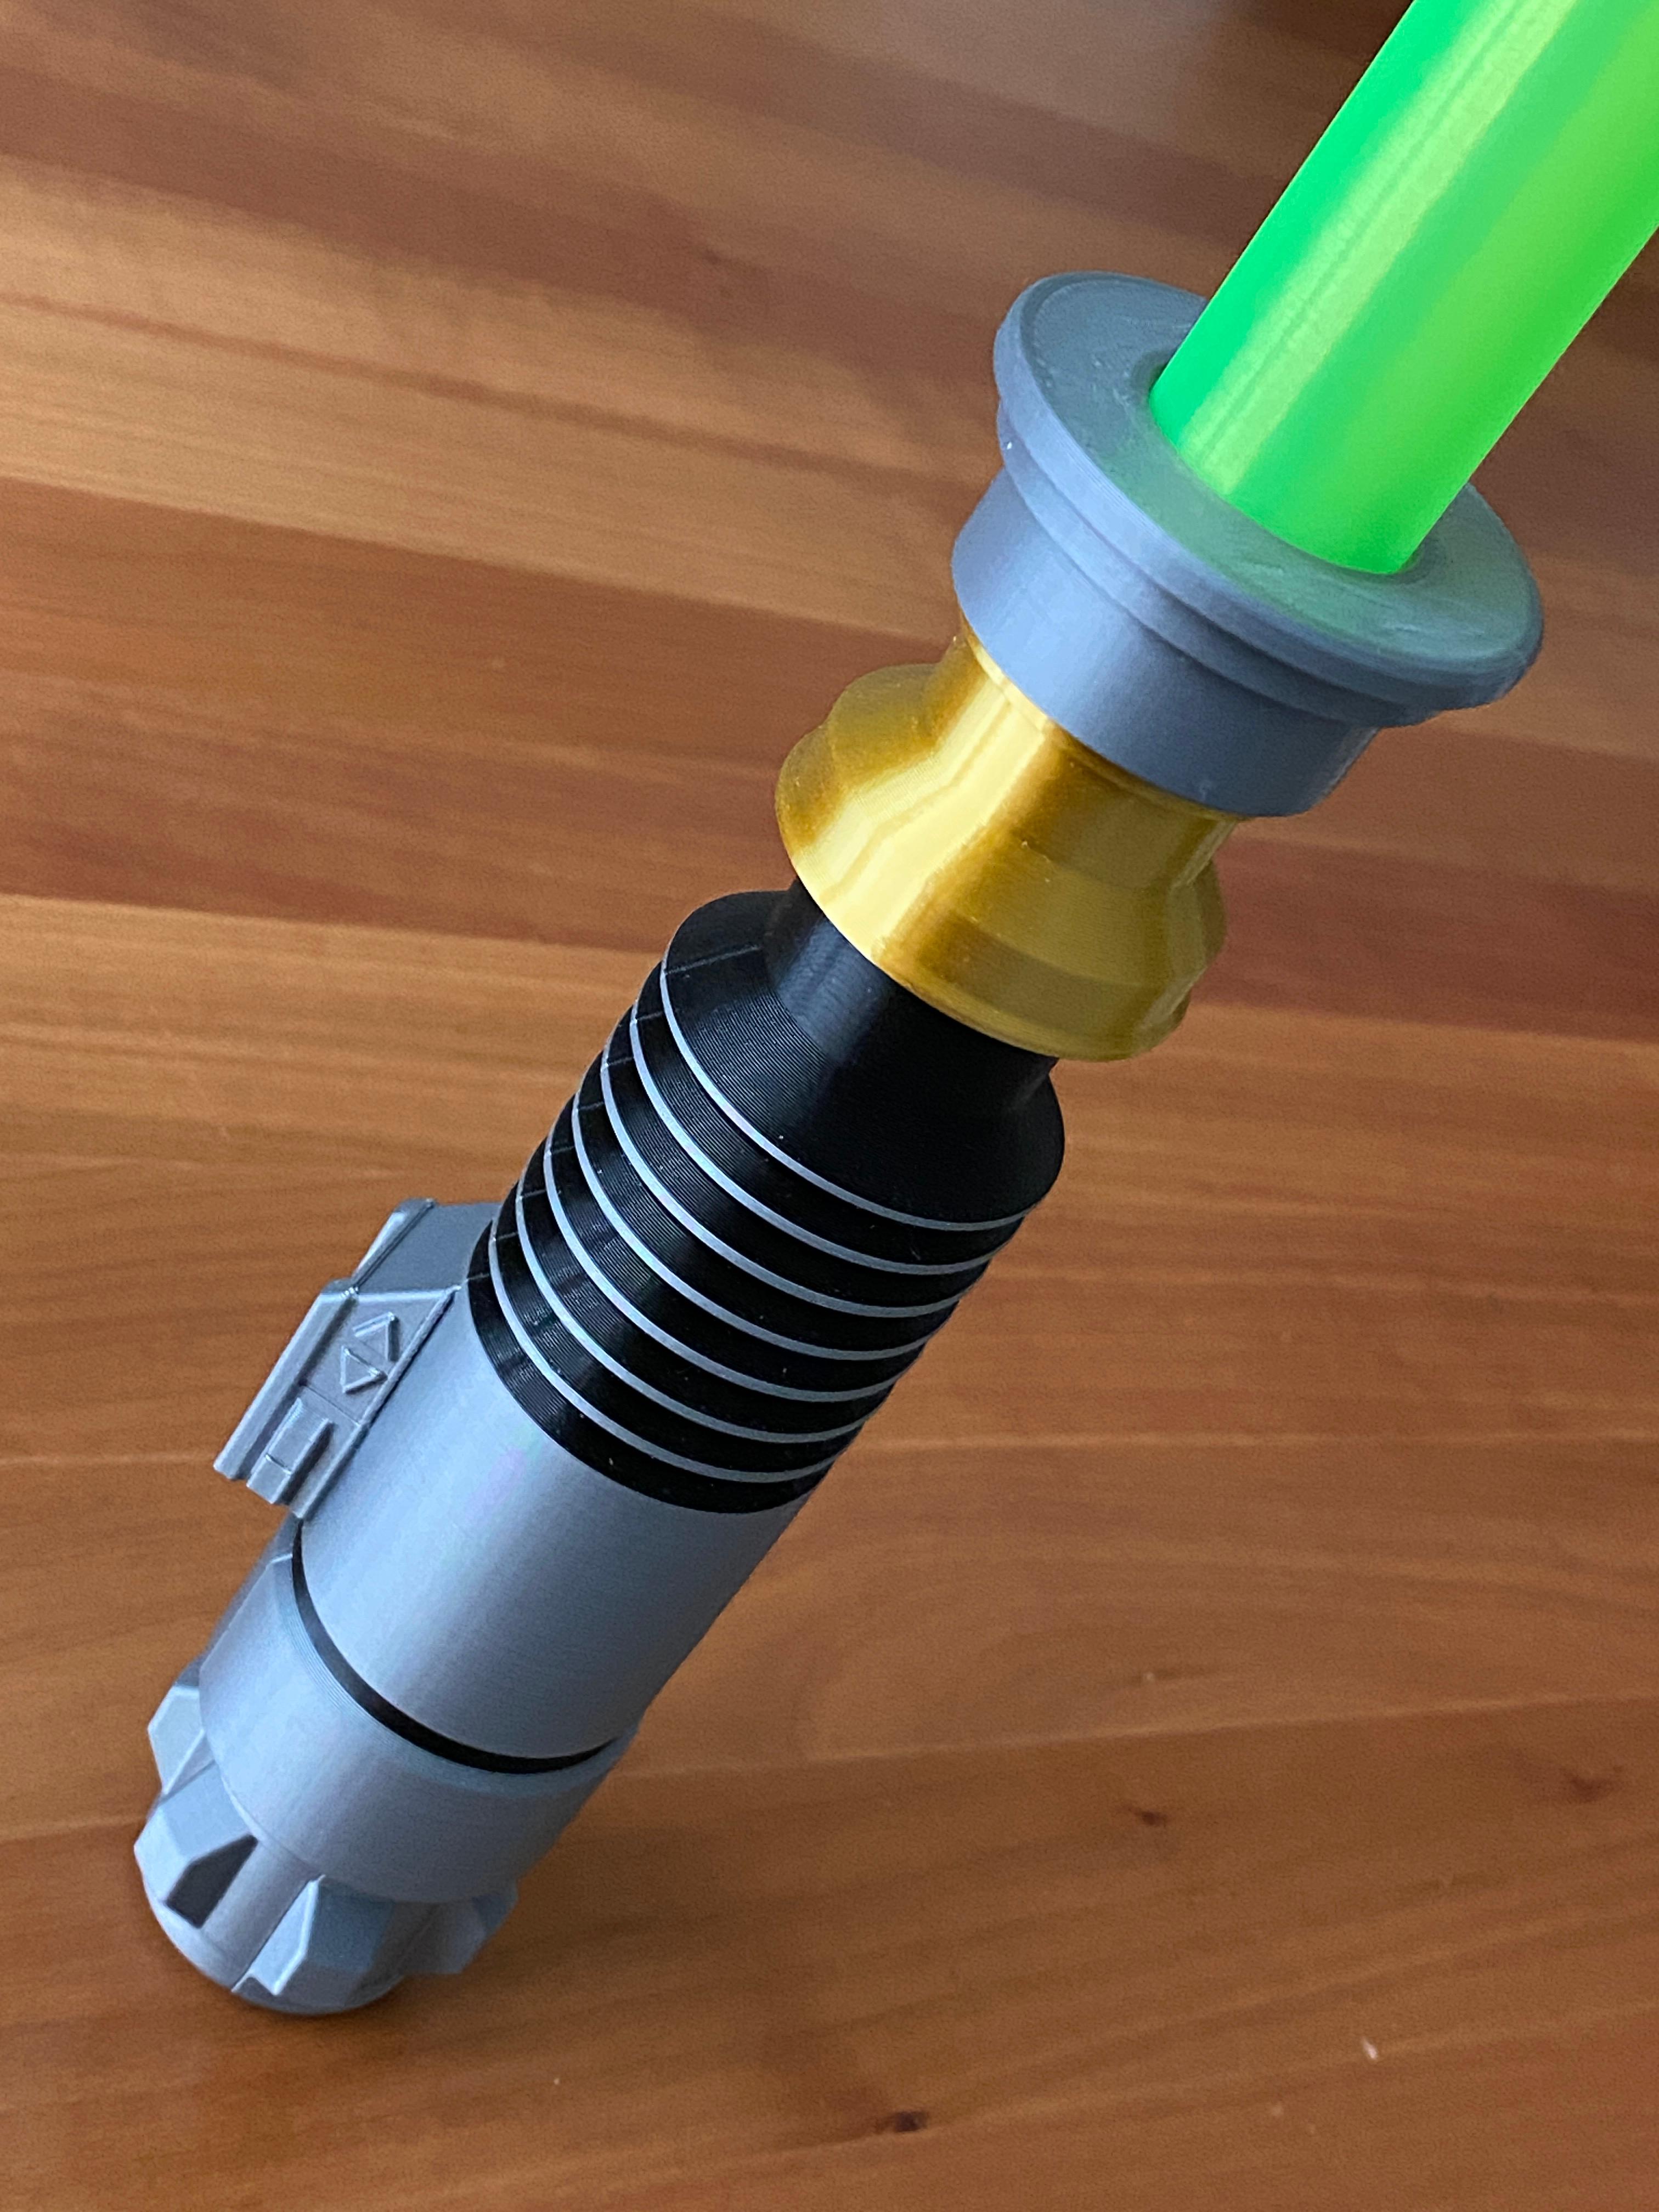 Collapsing Lightsaber - My take on it - first lightsaber for me, came out just fine. Printed on a slightly modified Ender 3v2, manual filament changes to achieve multiple colors.  - 3d model